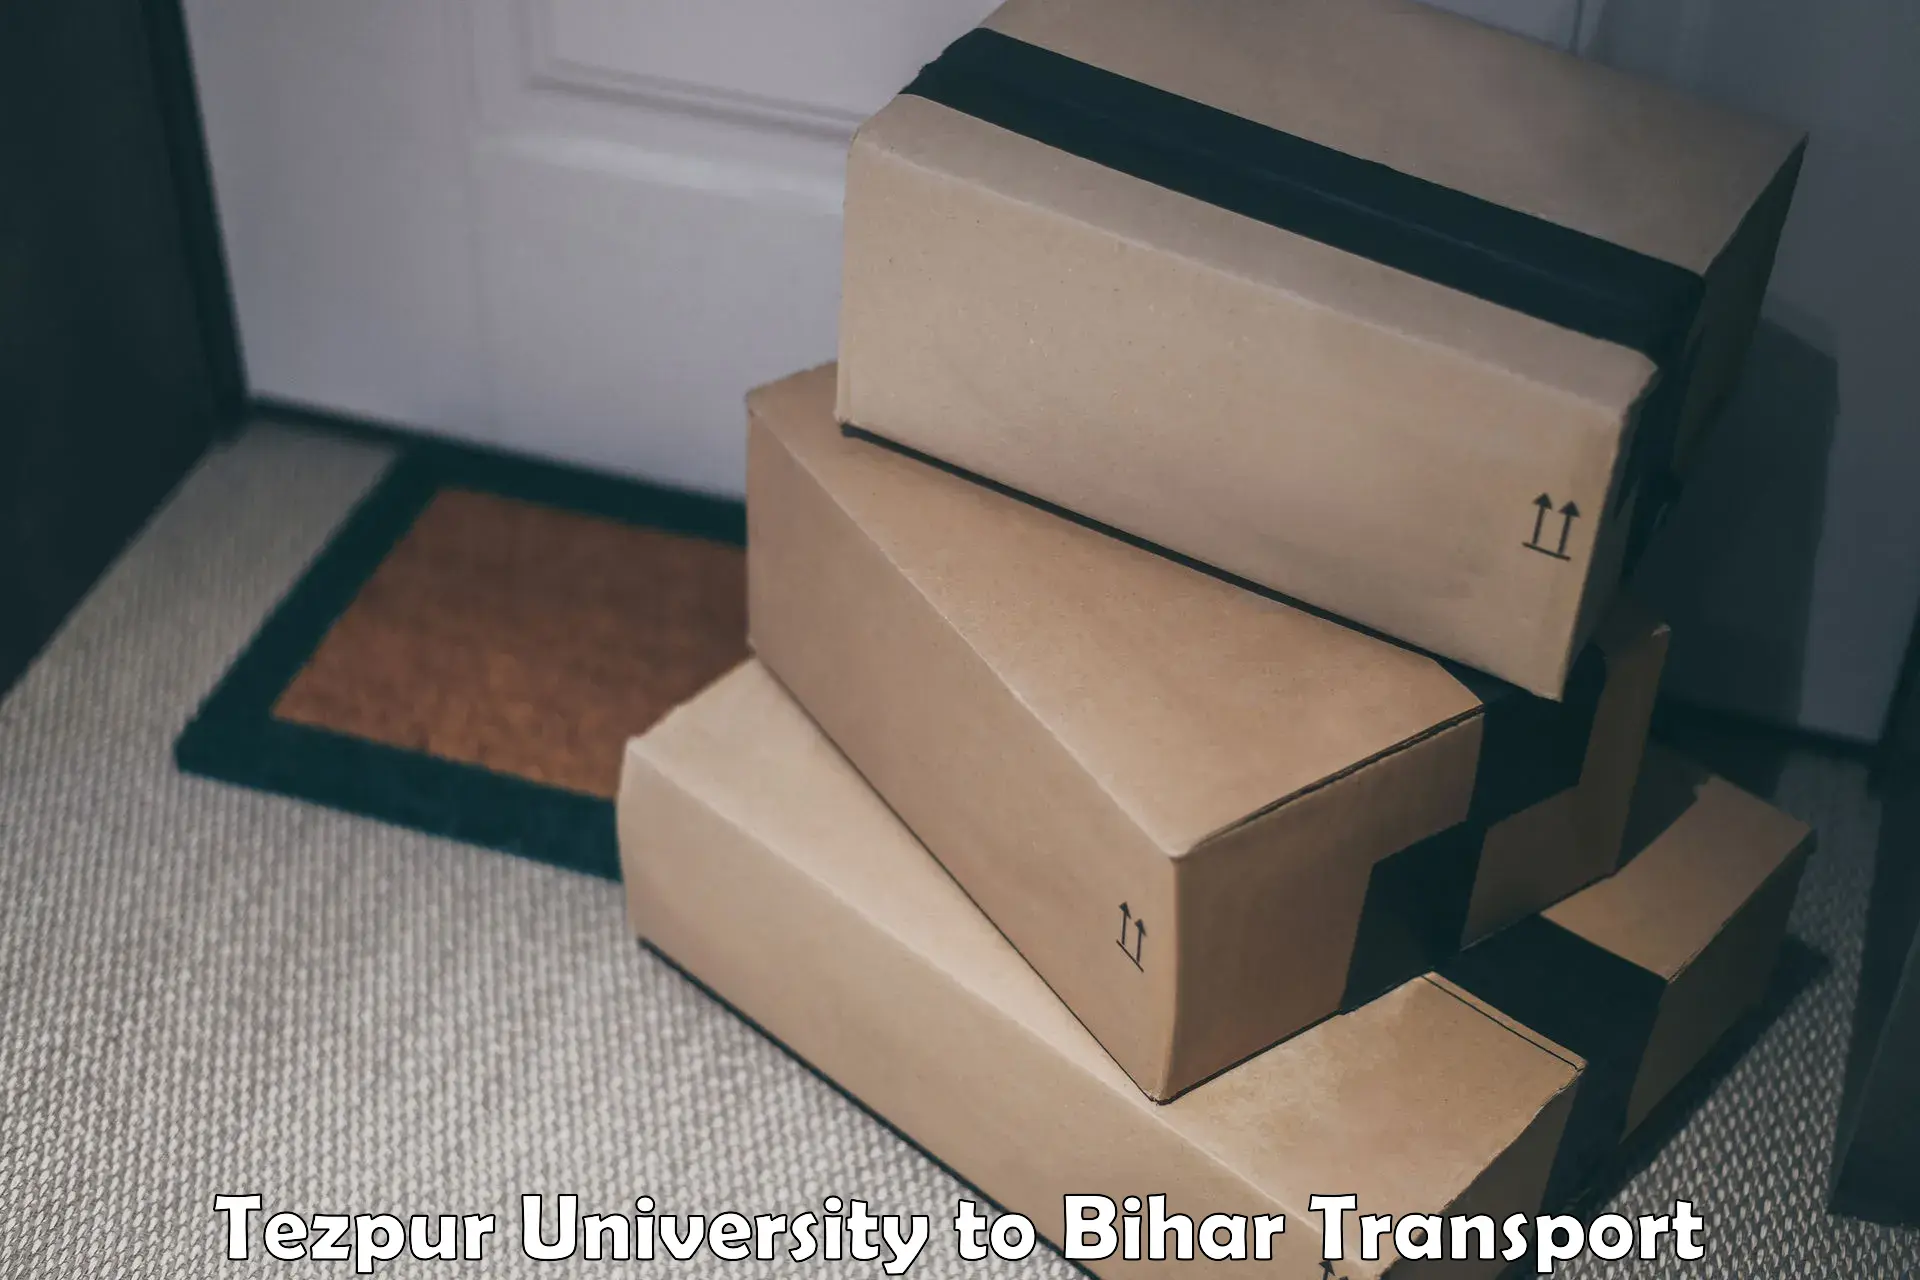 Domestic transport services in Tezpur University to Giddha